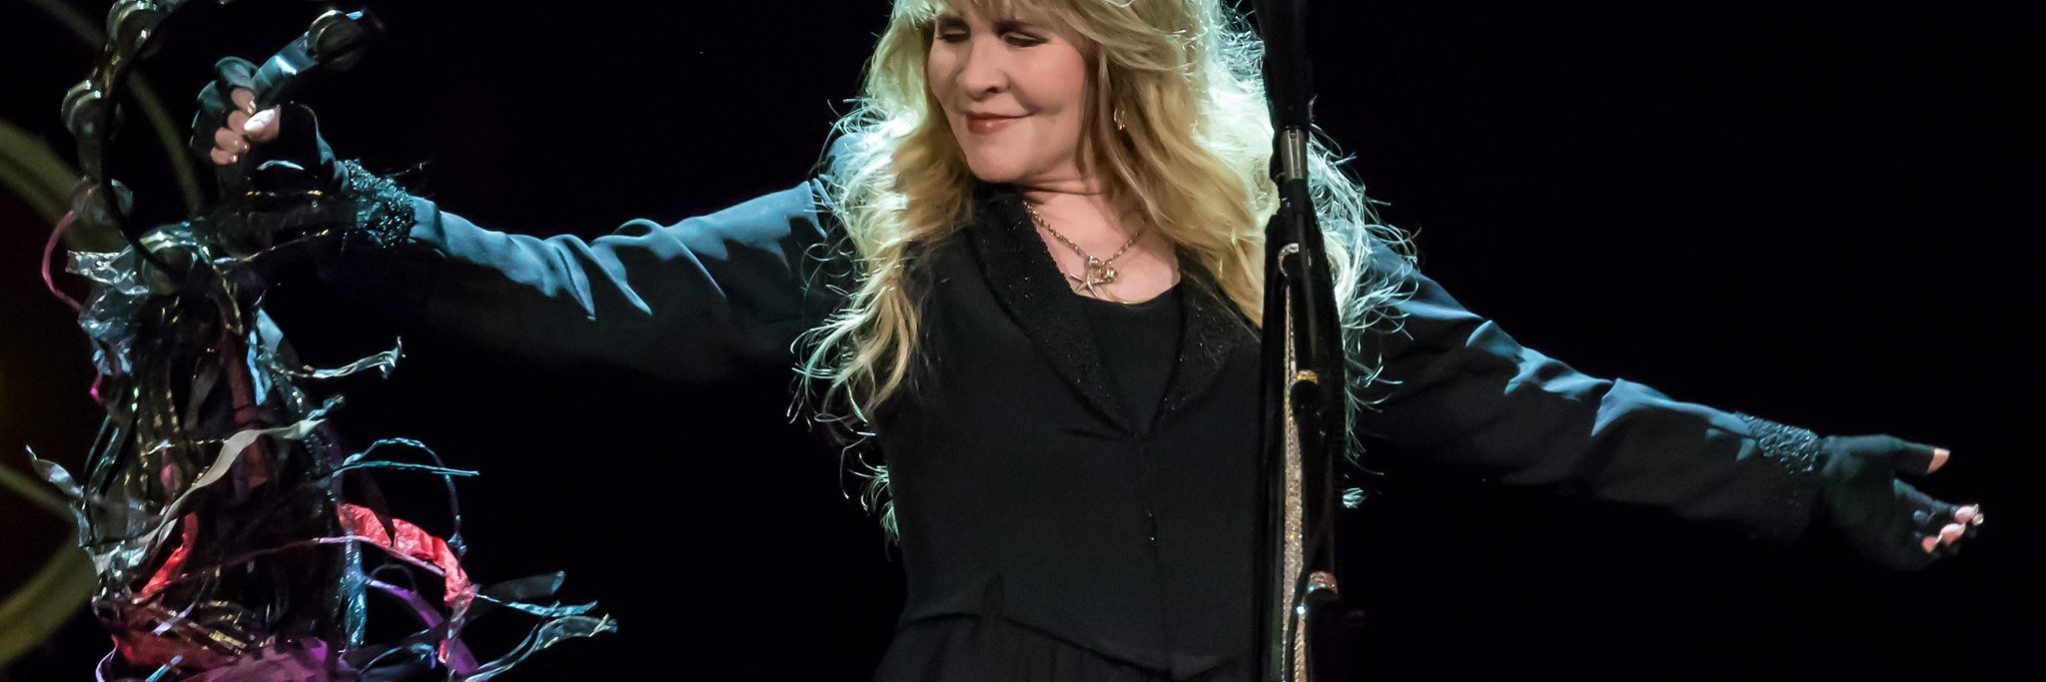 Stevie Nicks performing at the Frank Erwin Center in Texas on 12 March, 2017.